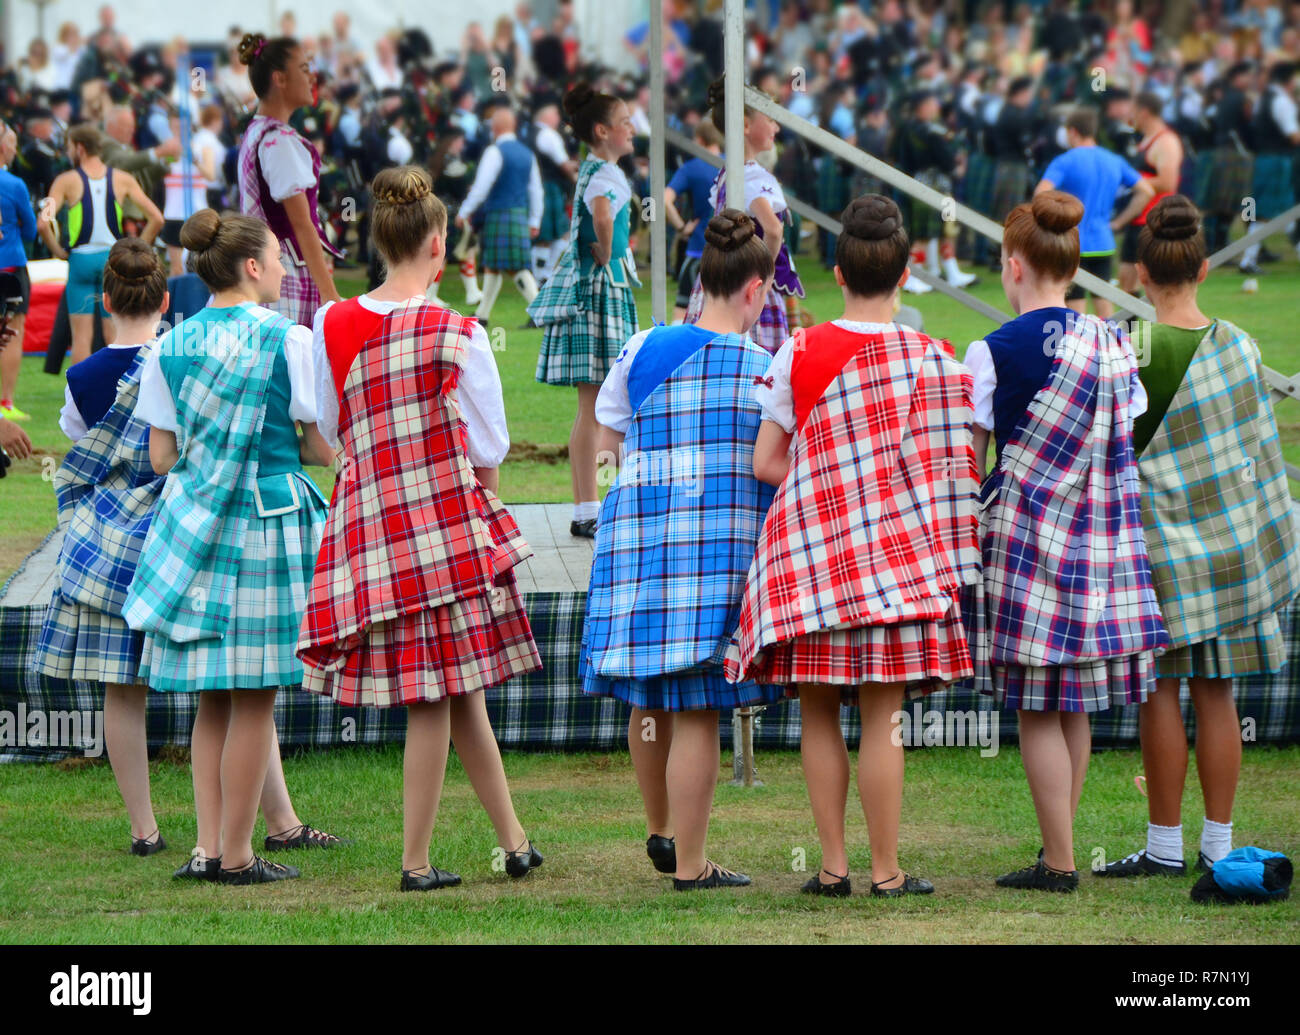 Young tartan kilted girls / woman wait to take part in the highland fling and sword dance events at the highland games in Aboyne, scotland Stock Photo